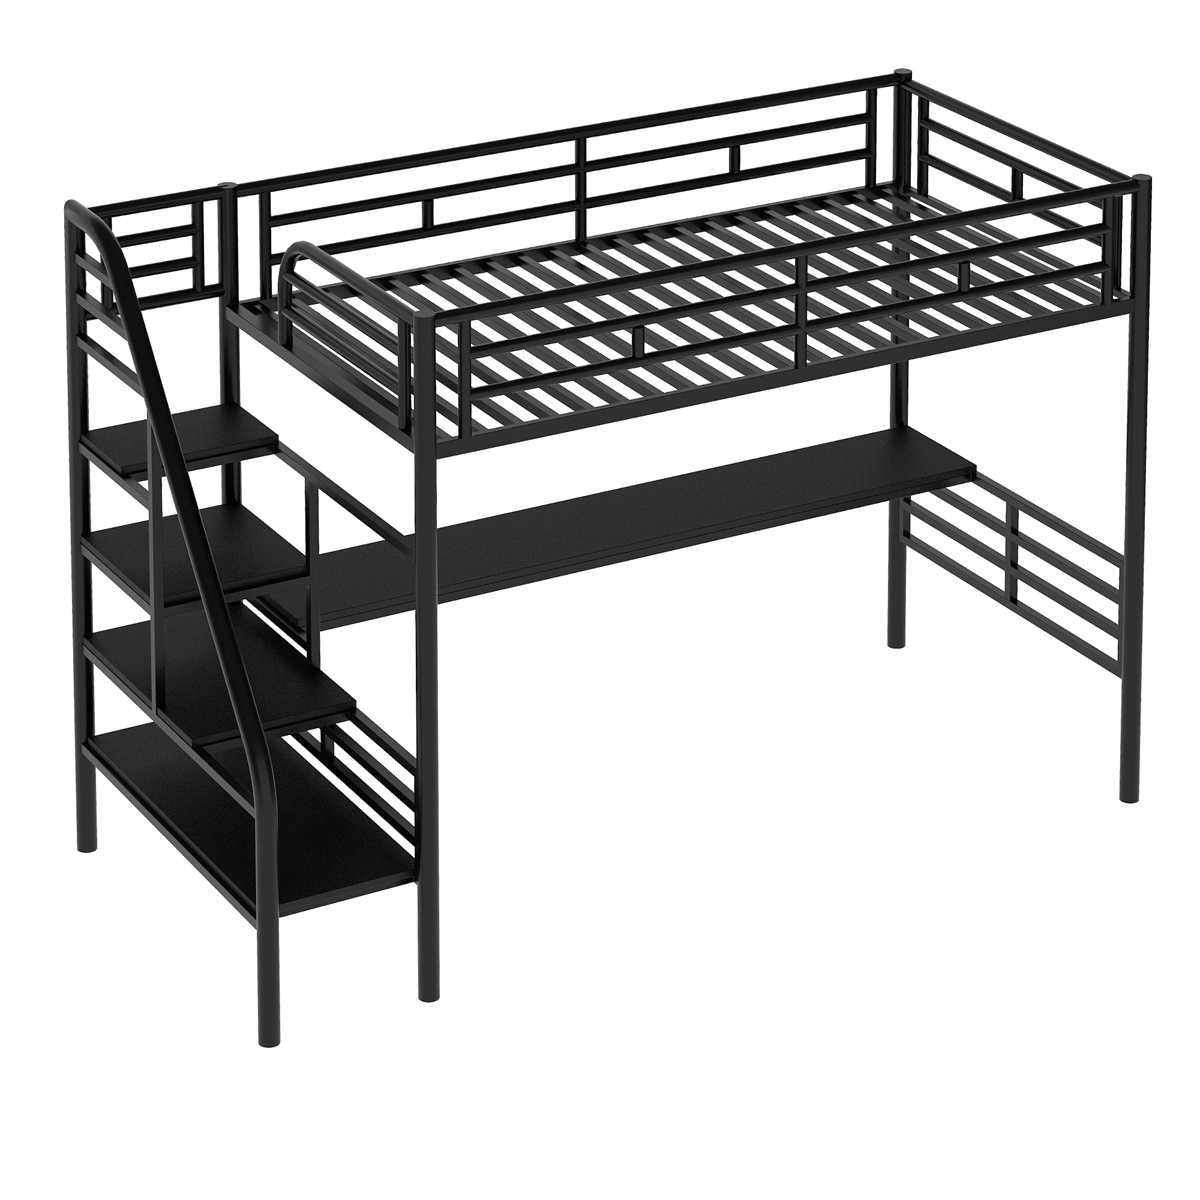 Metal Loft Bed, Twin Size Loft Bed Frame with Desk for Kids Teens Boys Girls, Noise Free Loft Bed with Stairs and Safety Guardrail for Bedroom, Space-Saving Design, No Box Spring Needed, Black - image 4 of 7